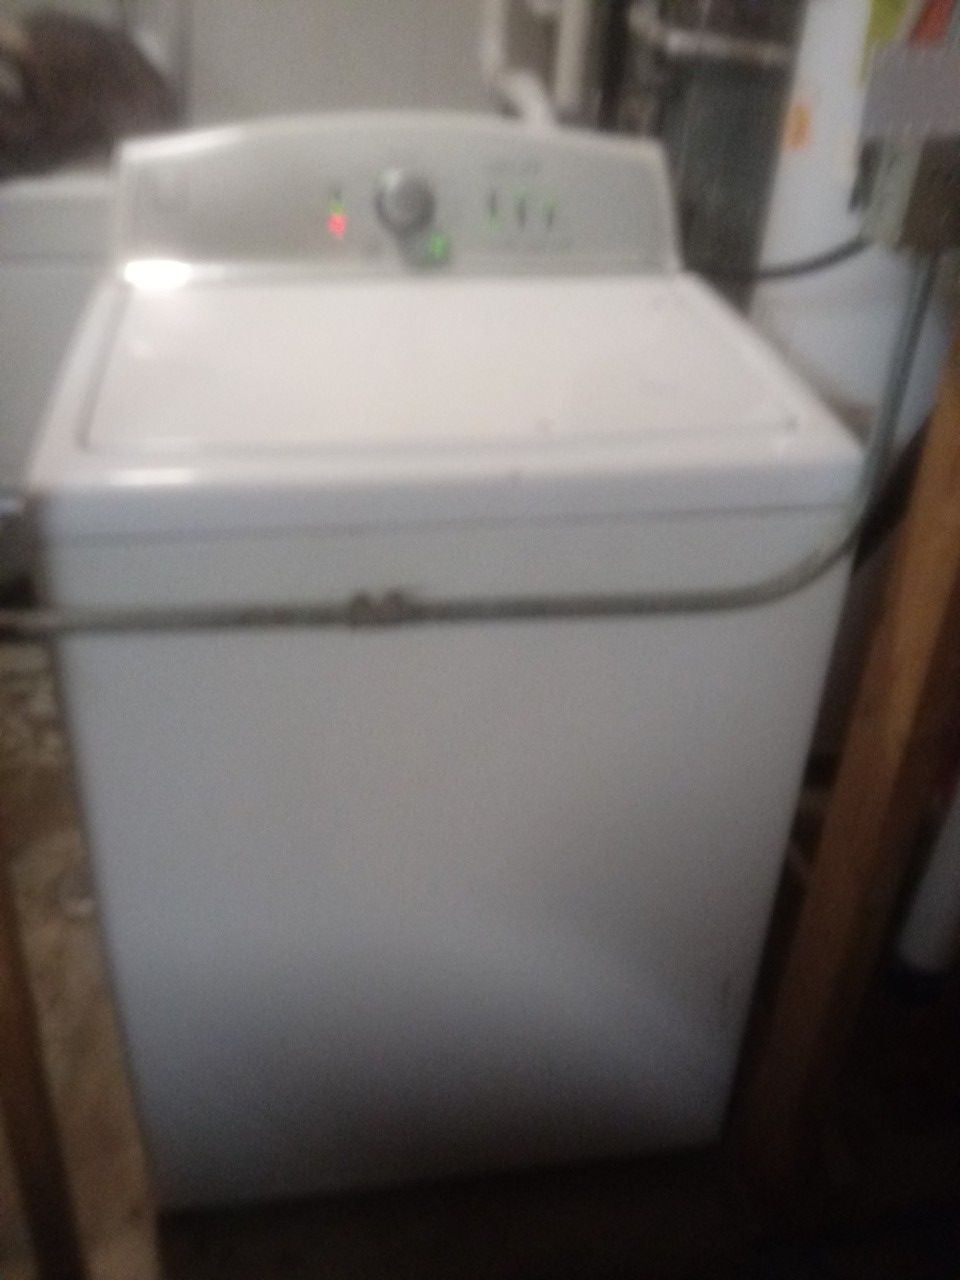 Kenmore high efficiency washer